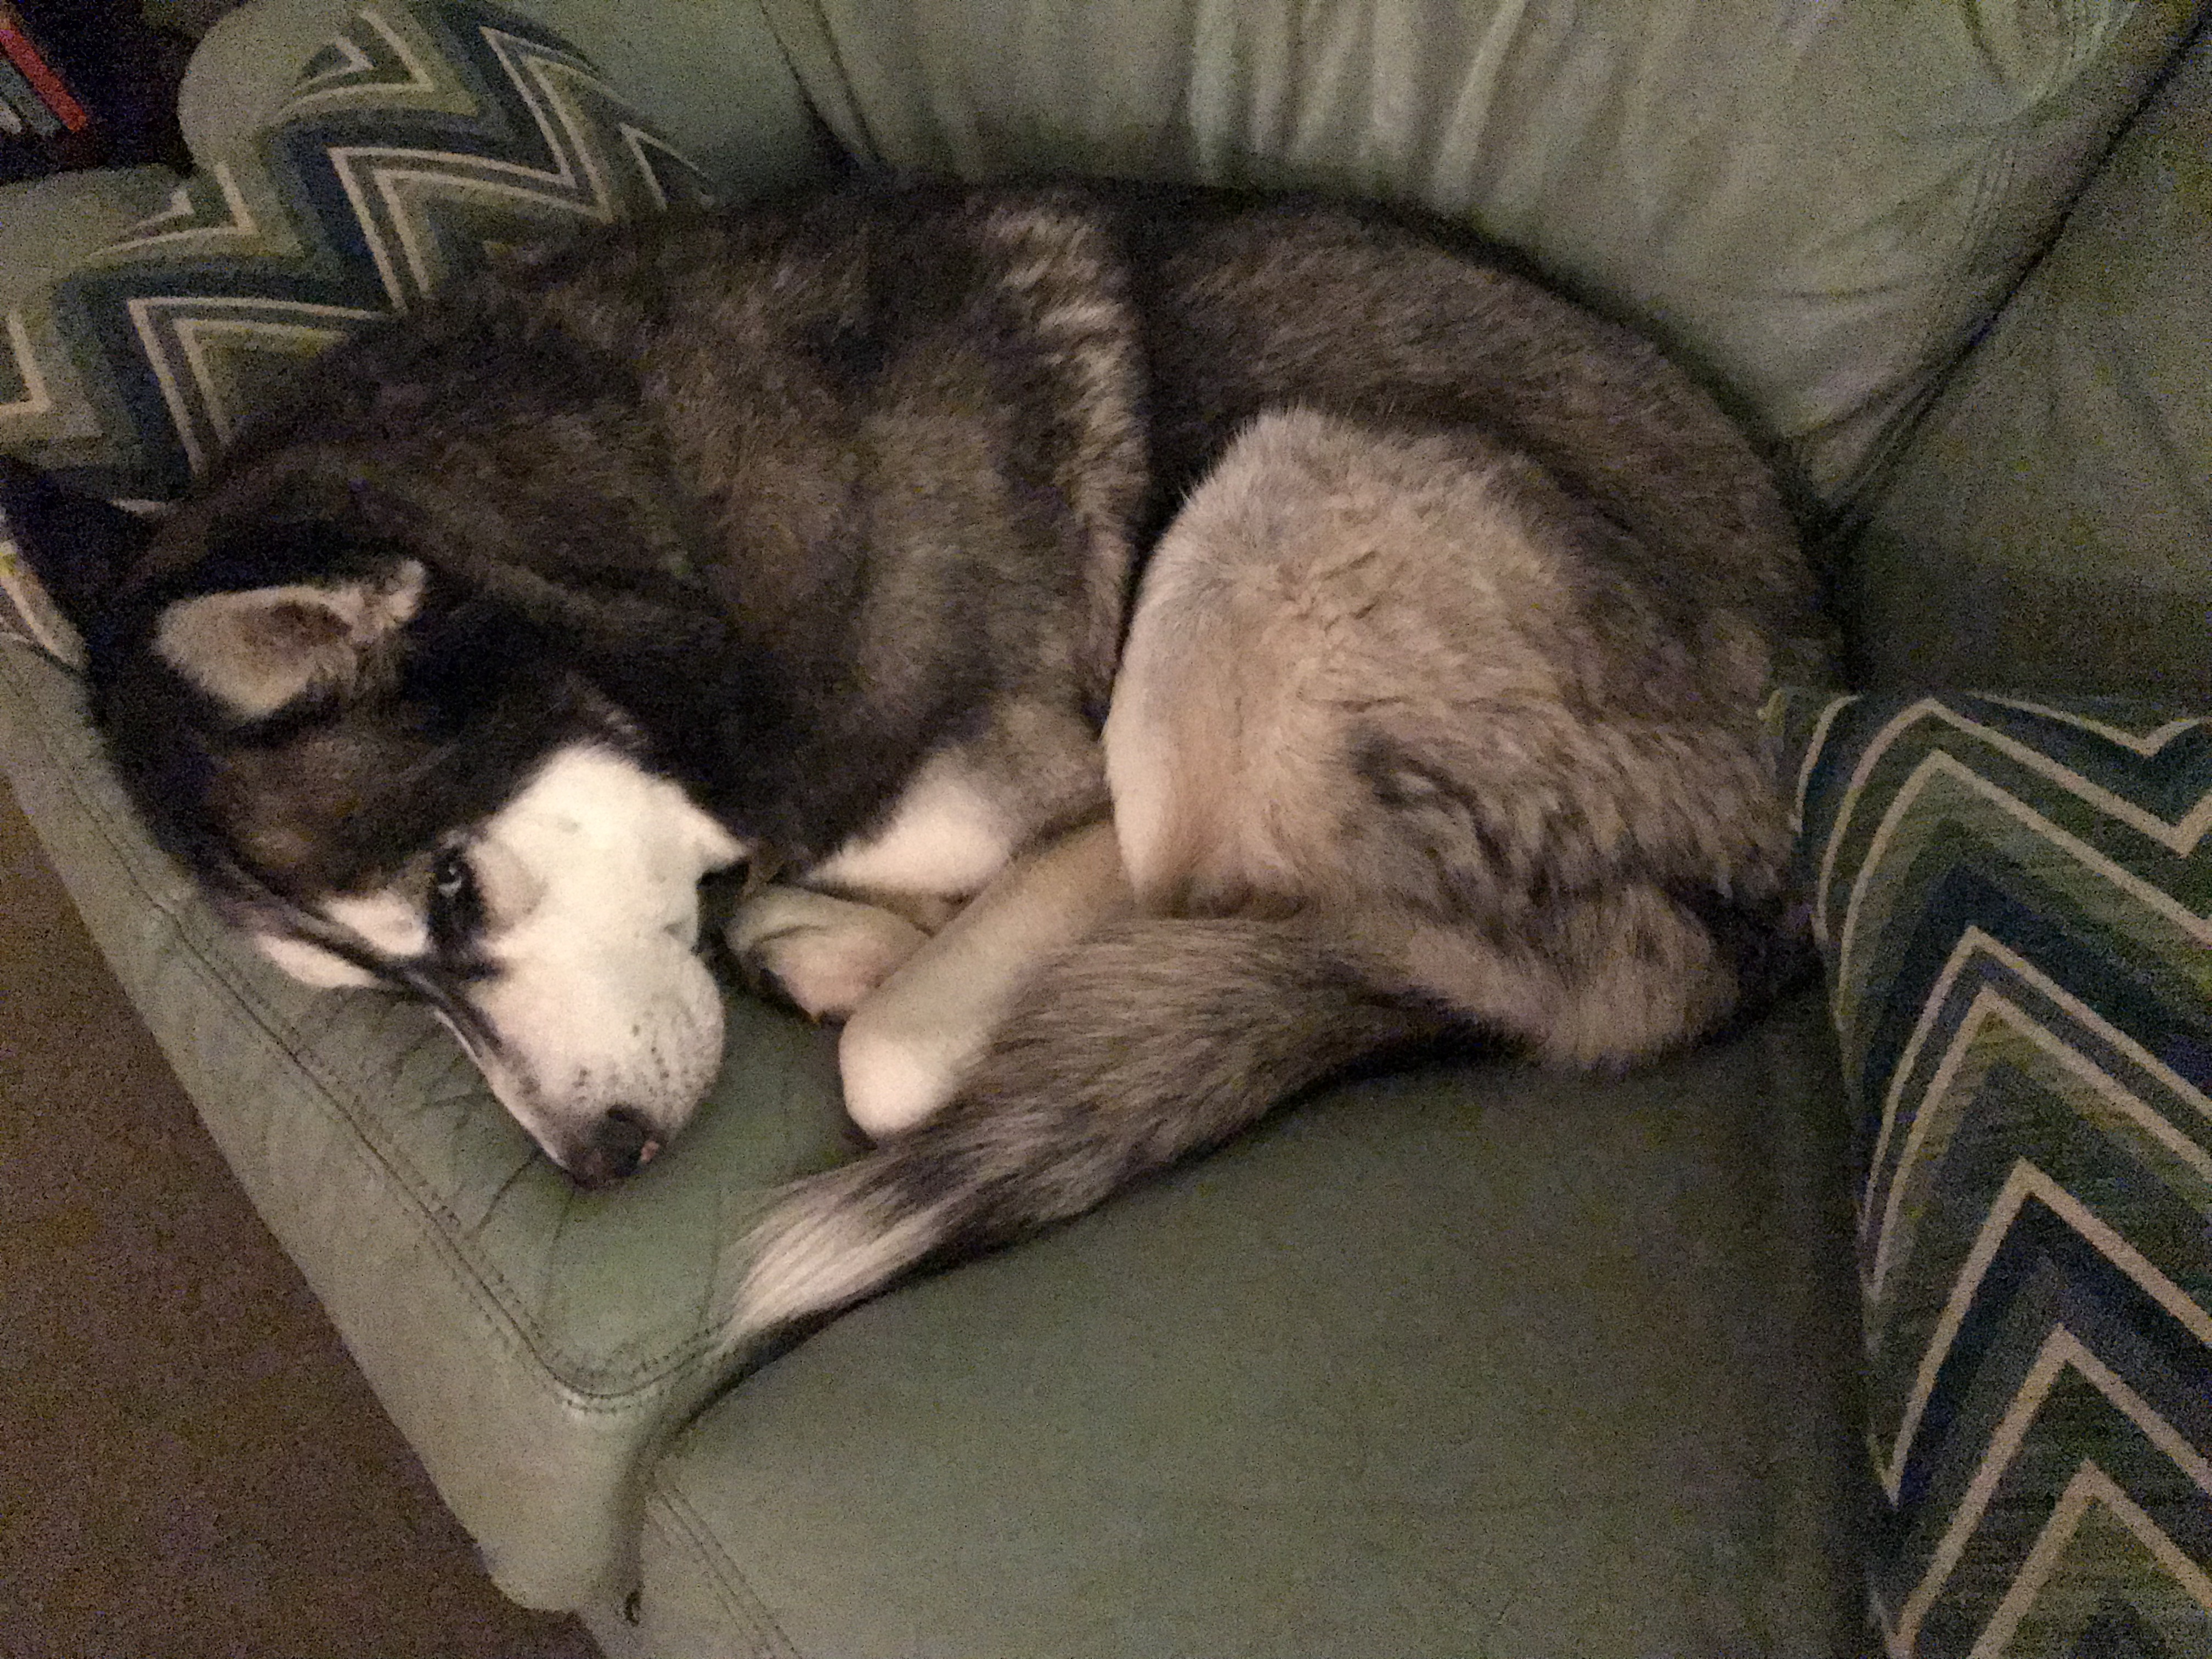 A black and white husky curled up into a tight a ball next to green chevron printed pillows on a mint green couch.